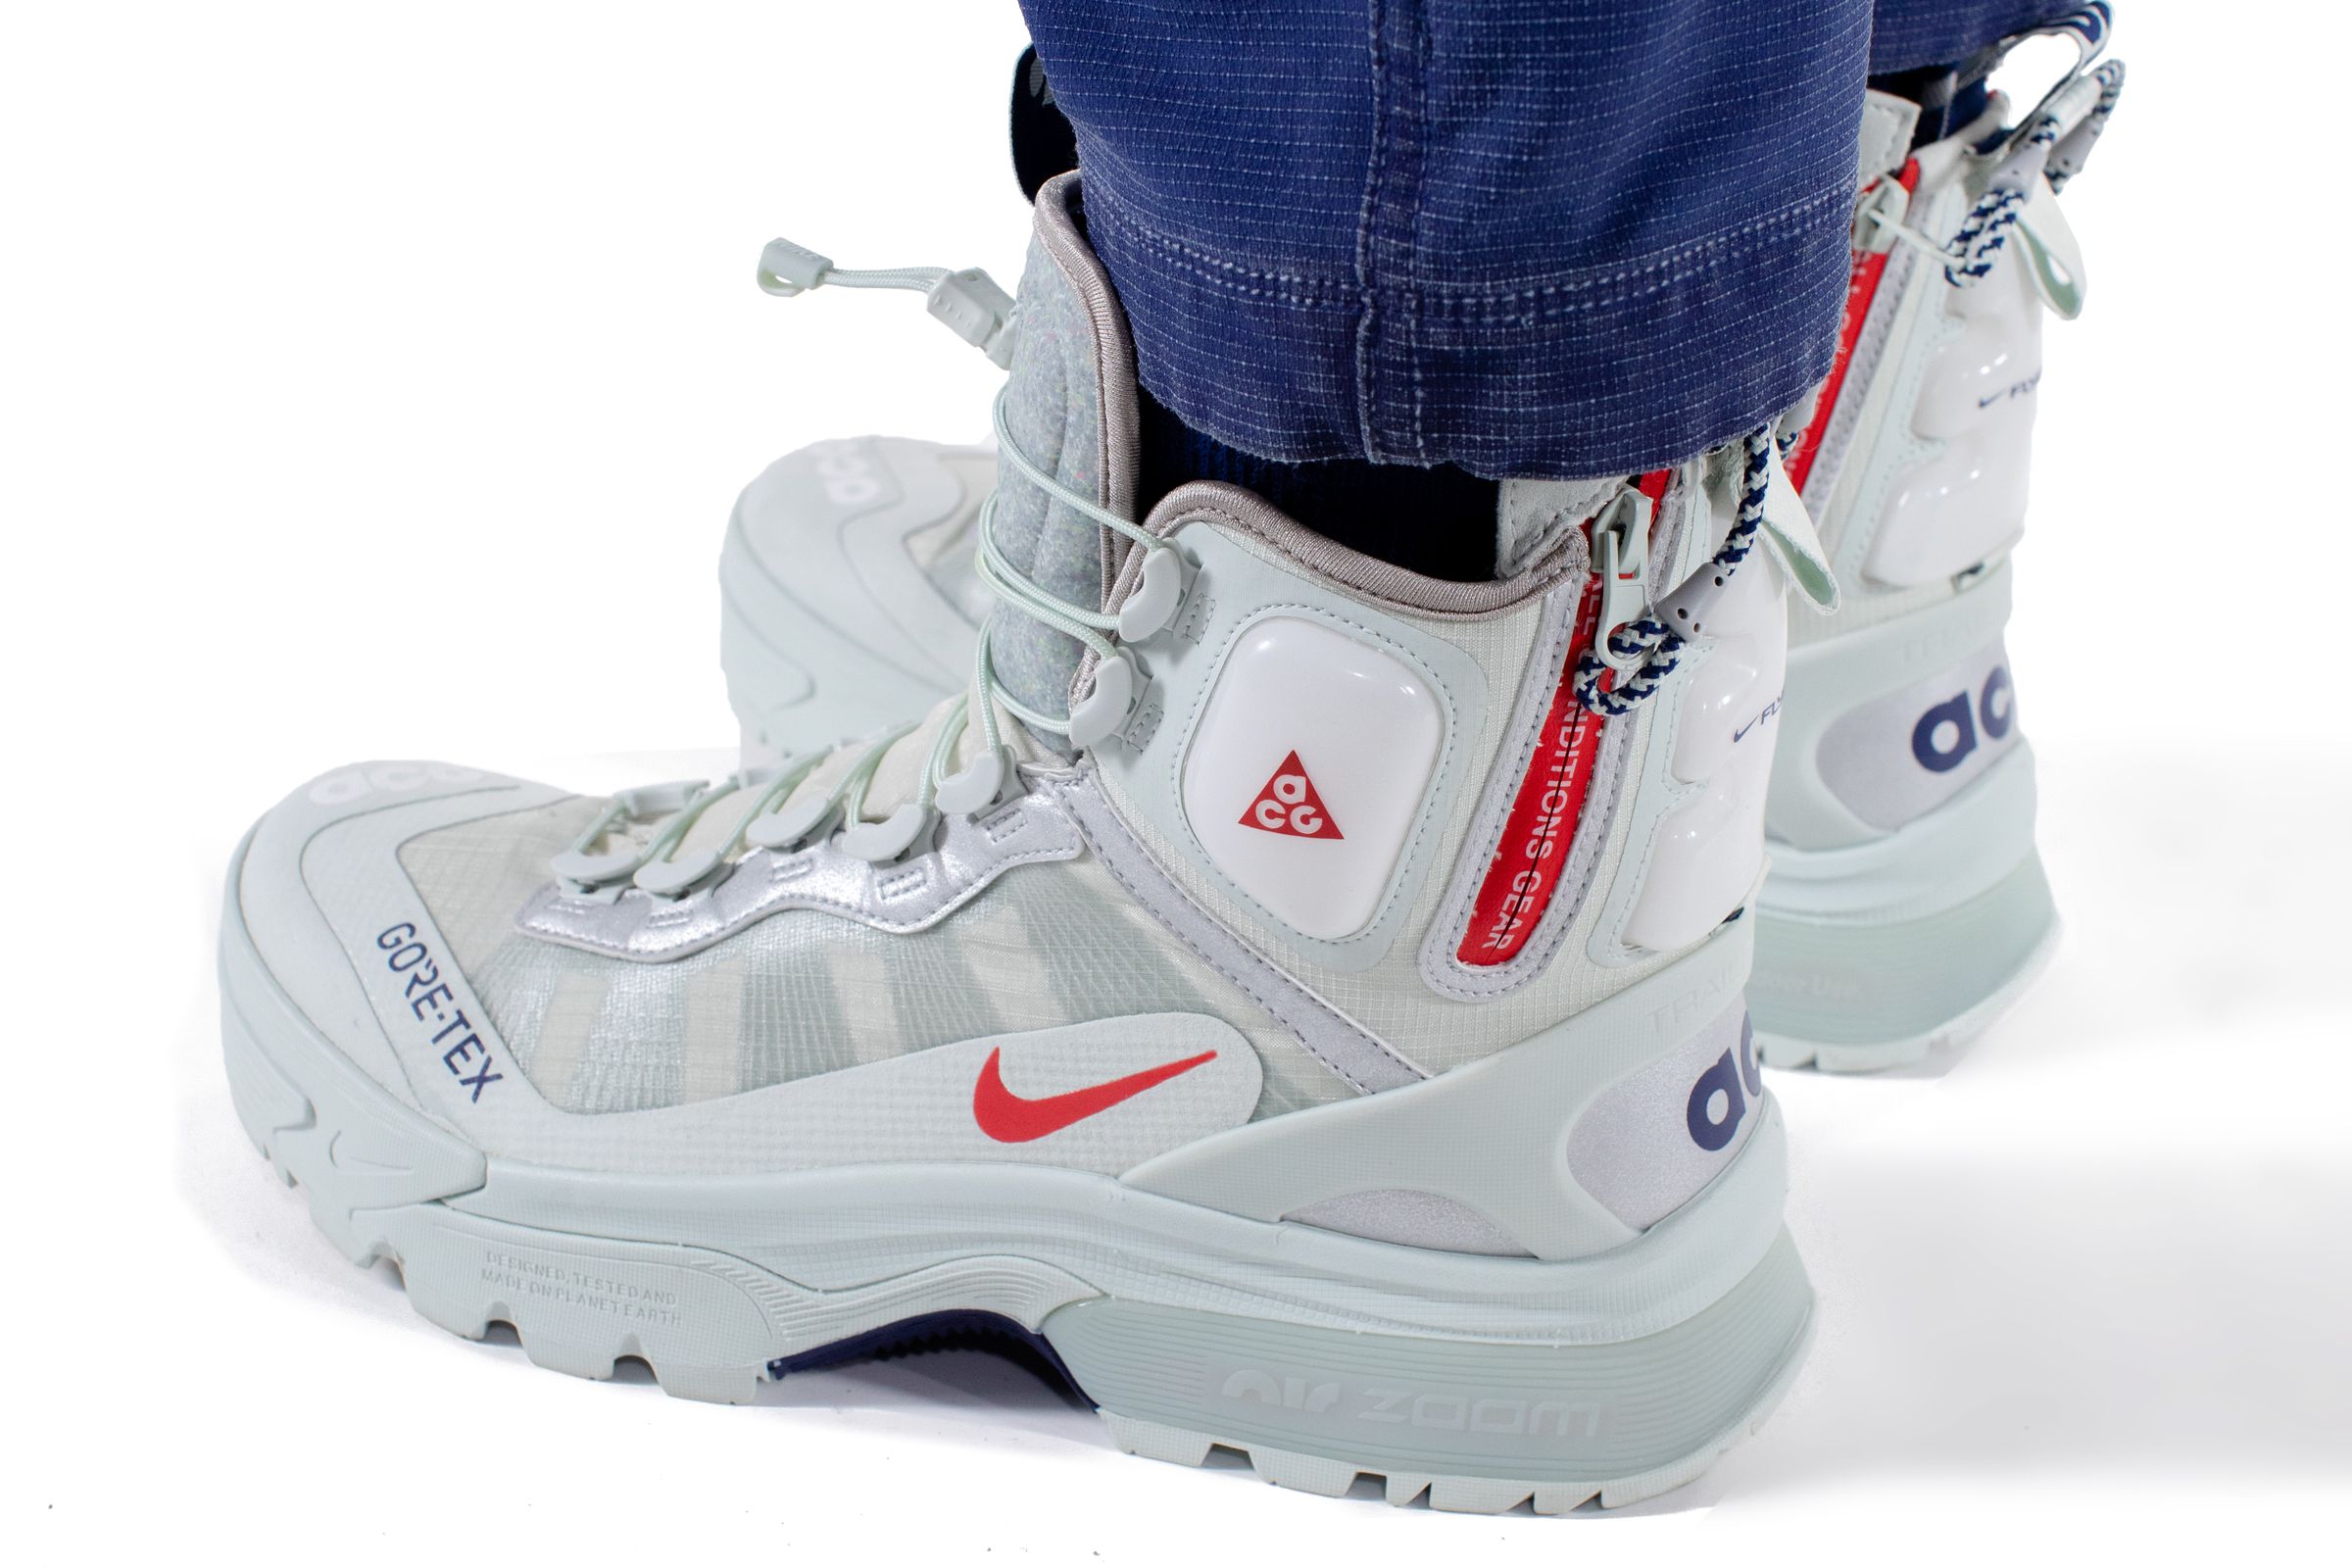 Nike’s ACG Gaiadome FlyEase Boot feature toggle laces and a zippered back entry.